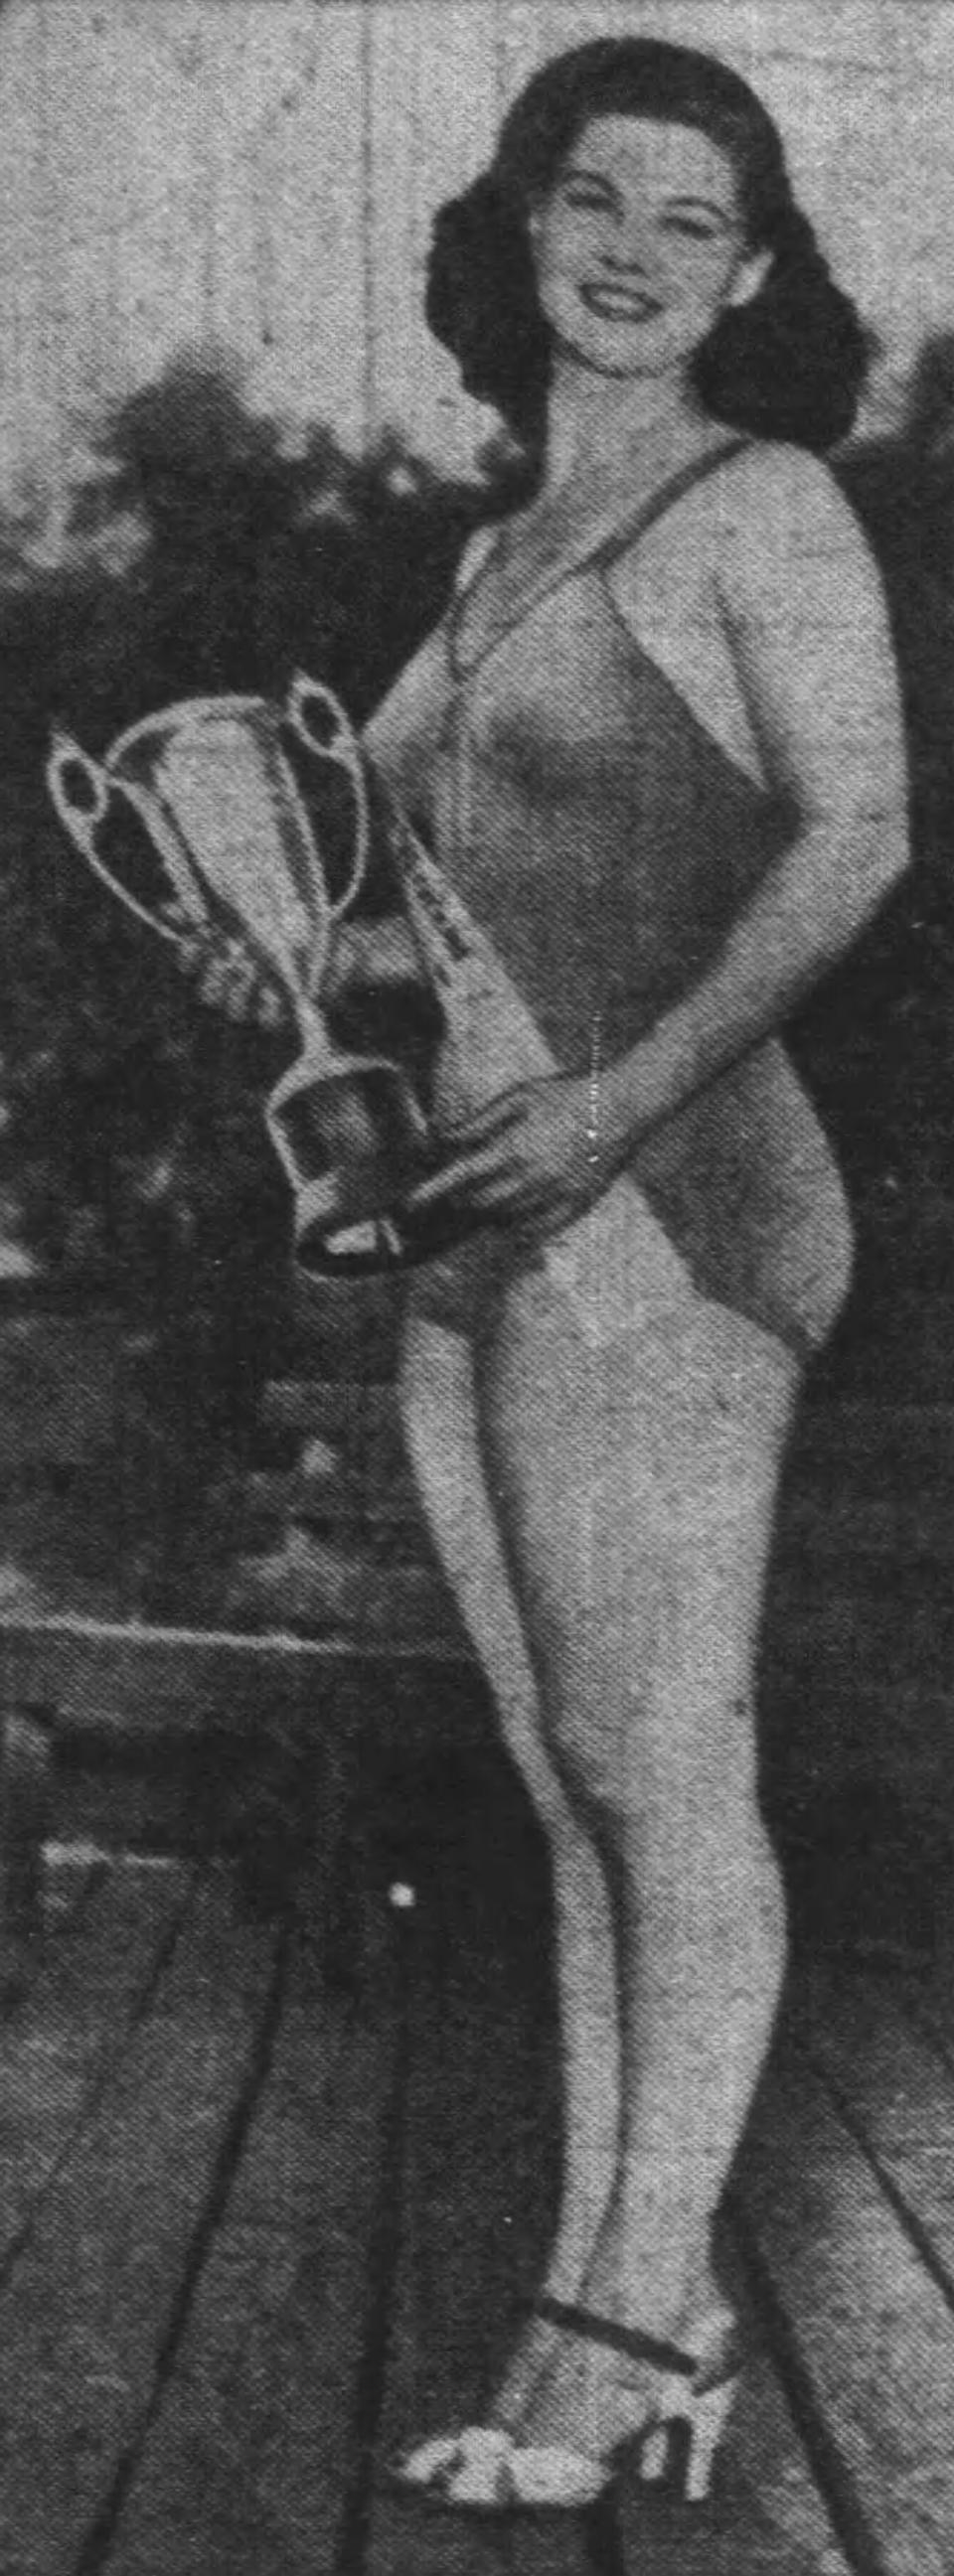 Dorothy Streicher, whose stage name was Kiki Arnold, holds a trophy in 1939 after being crowned the B.F. Goodrich queen at a United Rubber Workers of America picnic at Geauga Lake Park.